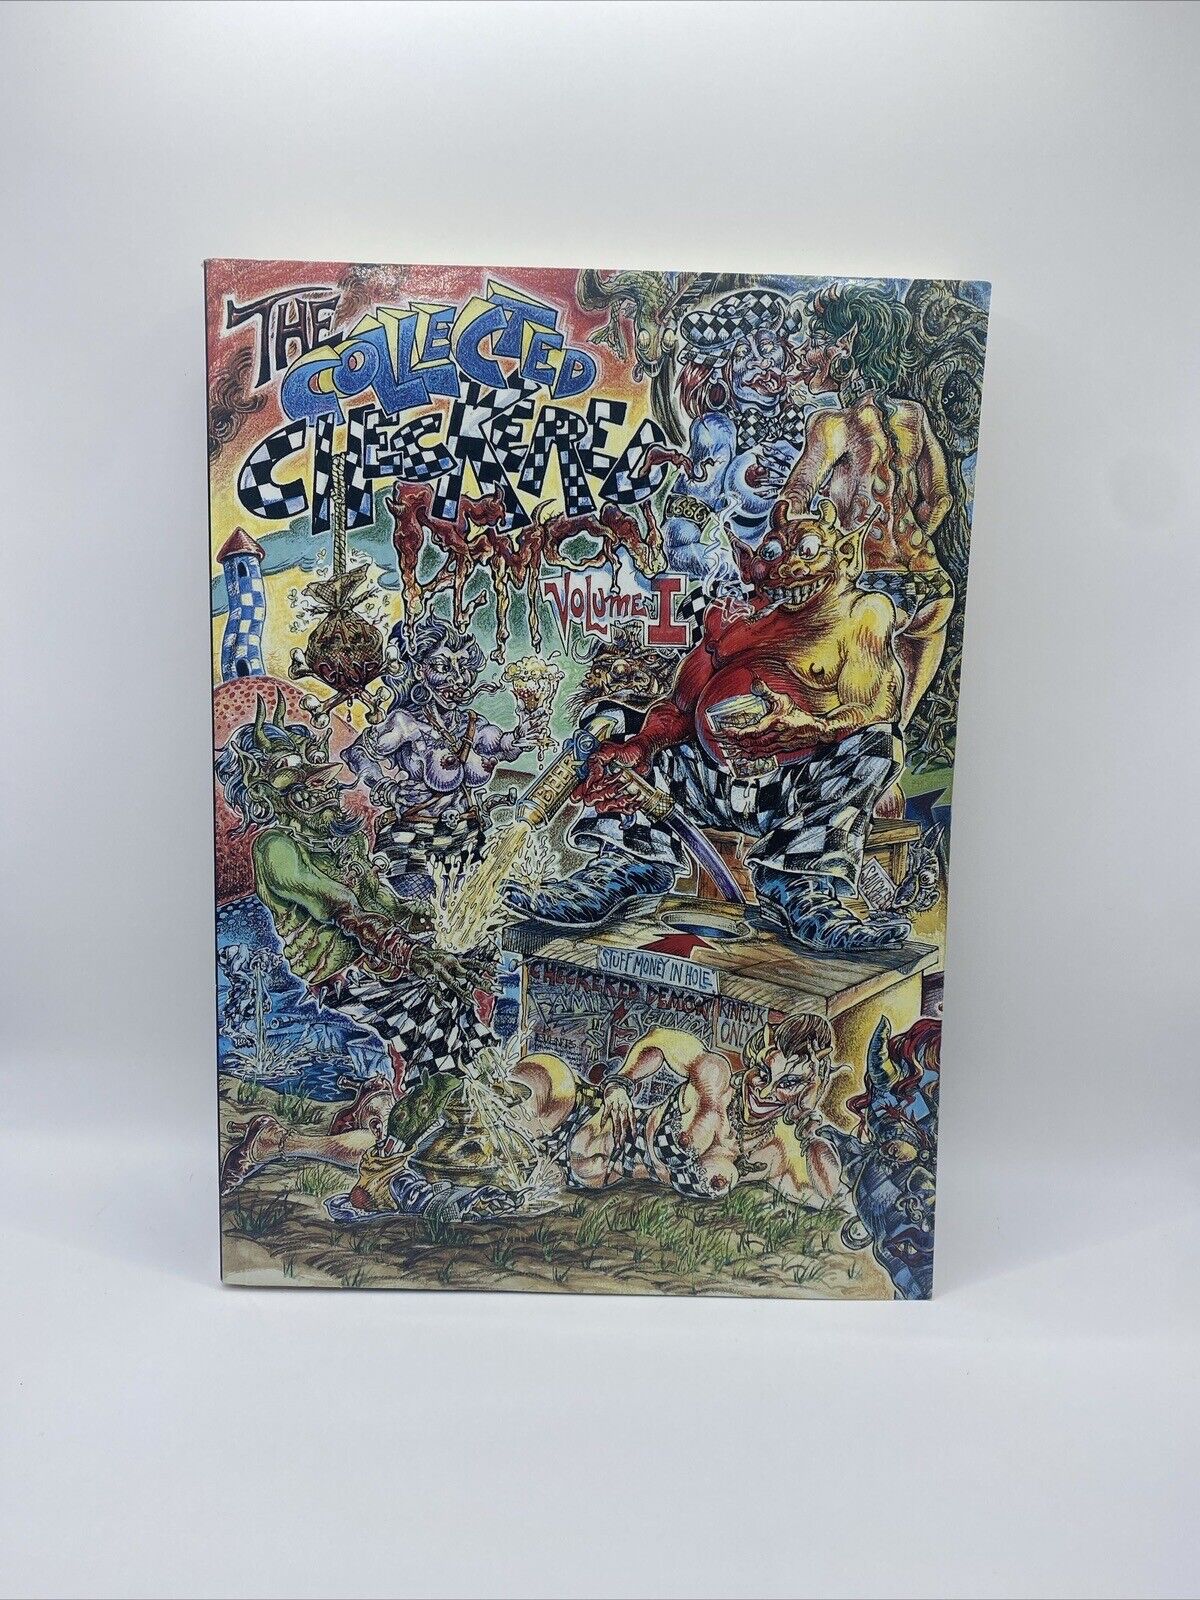 The Collected Checkered Demon Anthology V1 by Last, First Edition soft cover